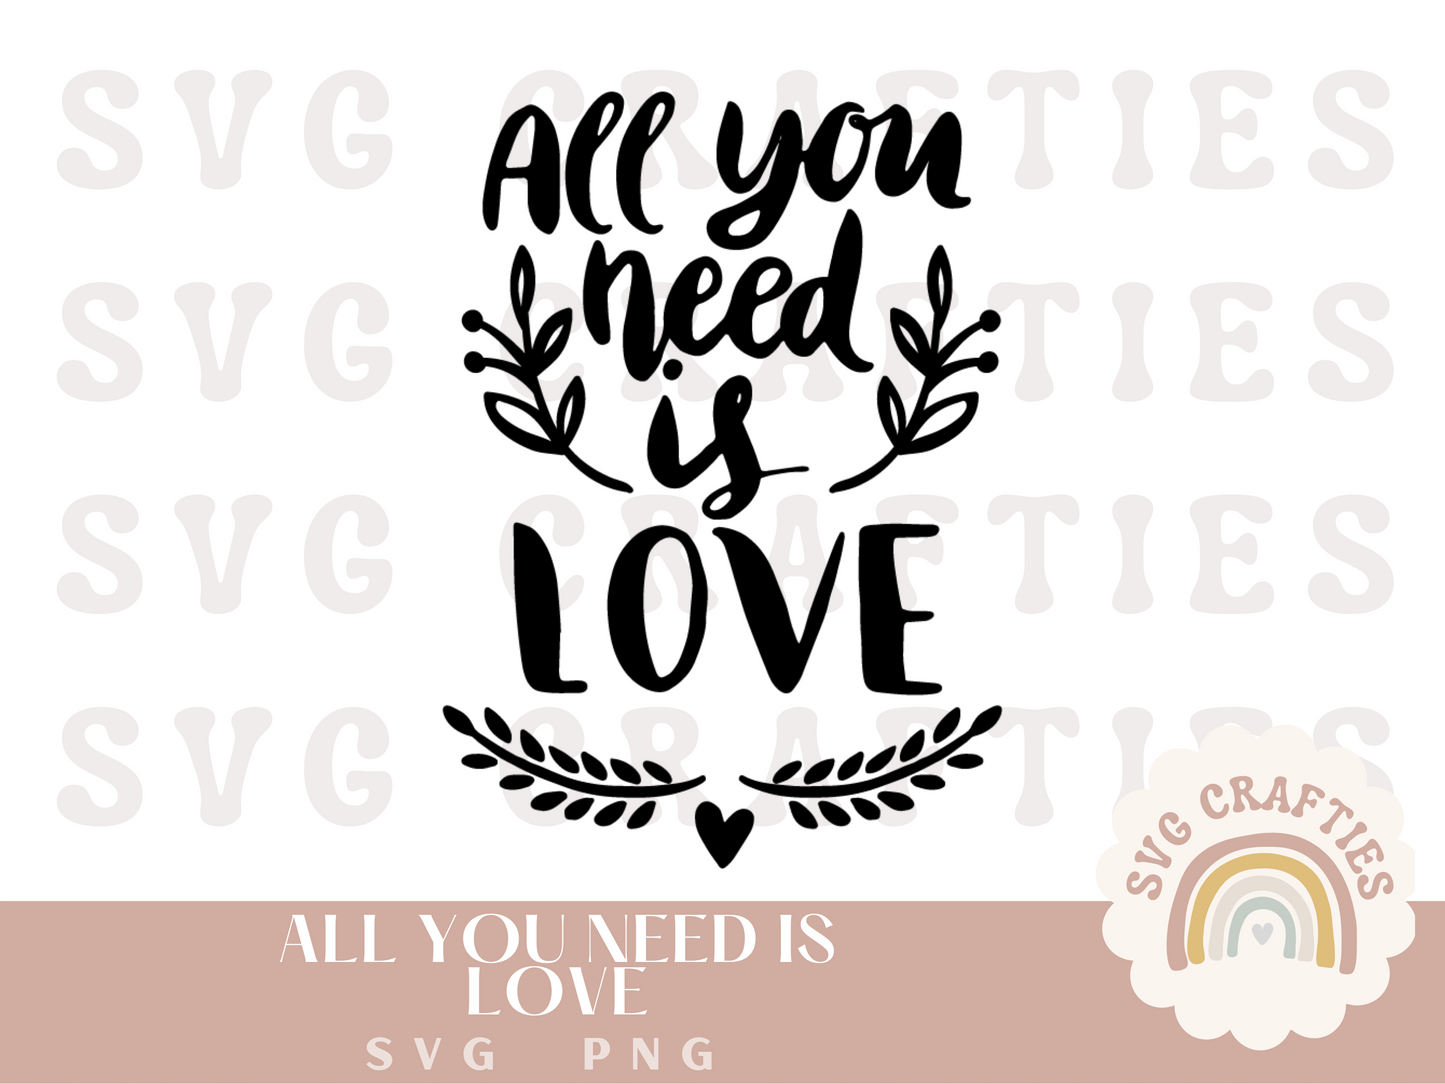 All You Need is Love Free SVG Download